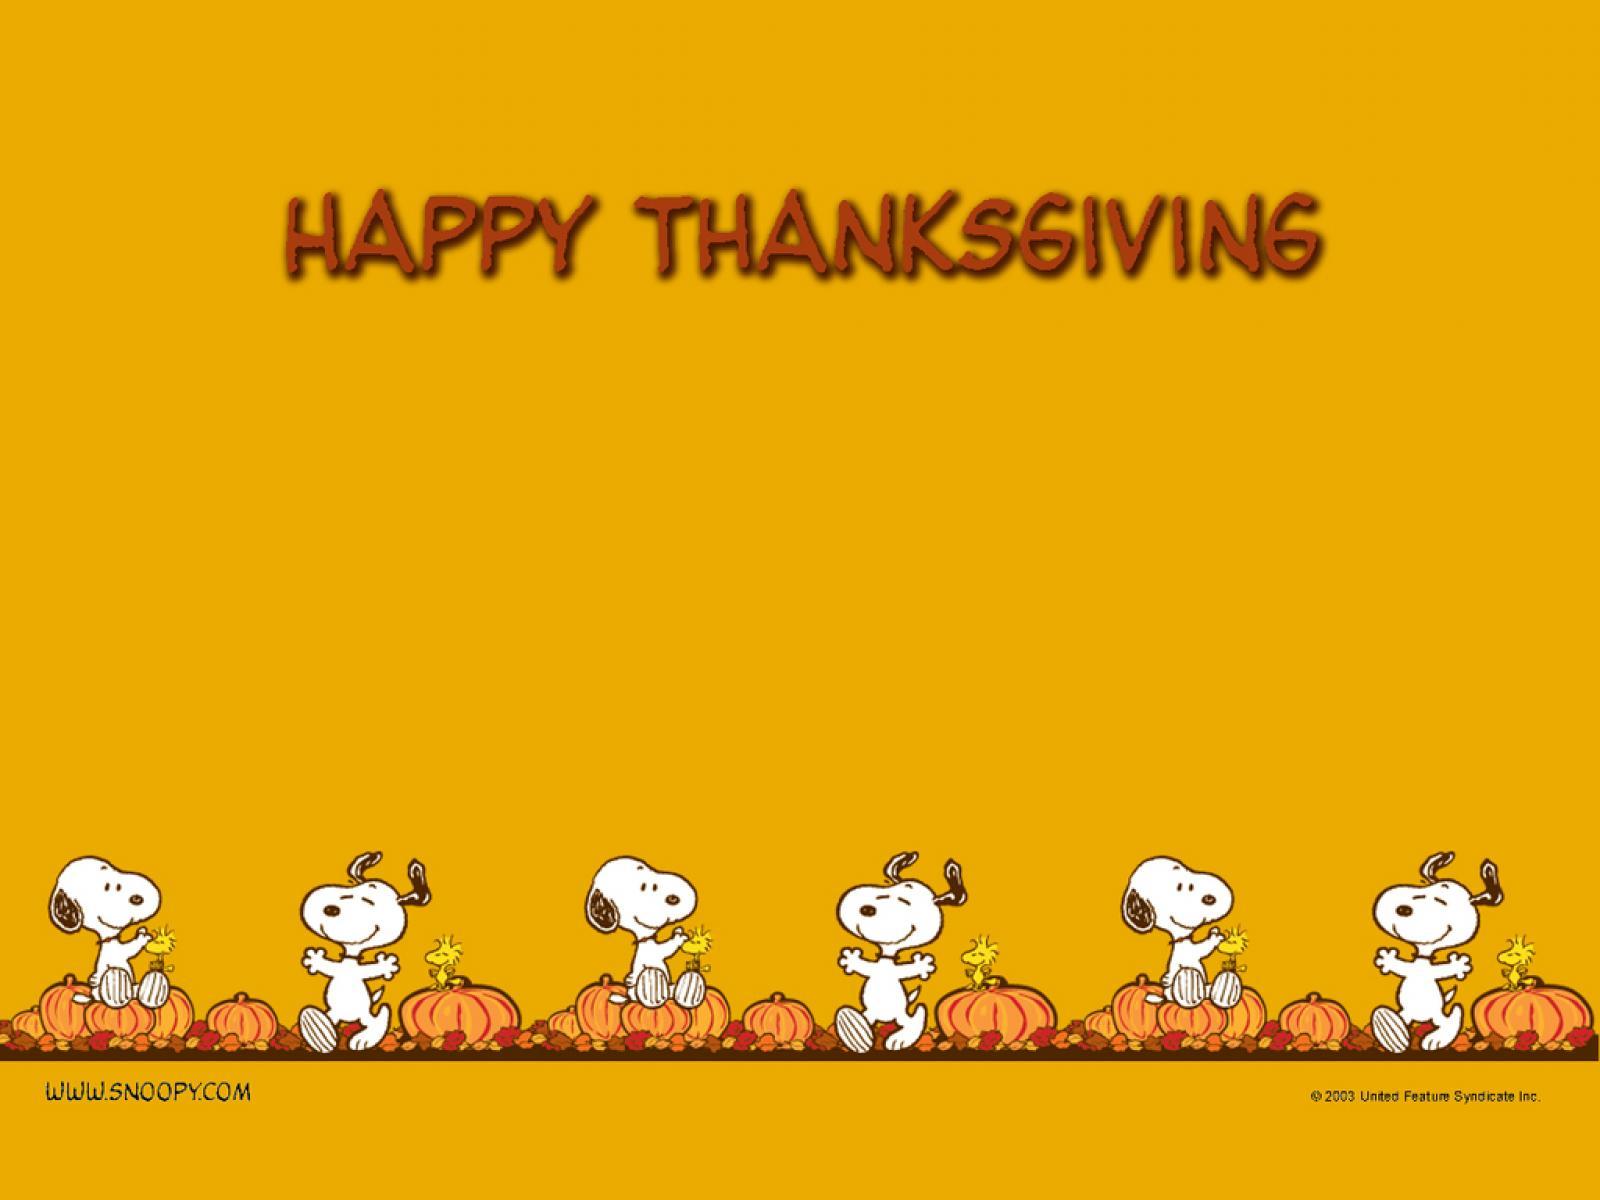 Wallpapers For > Cute Thanksgiving Wallpapers For Iphone